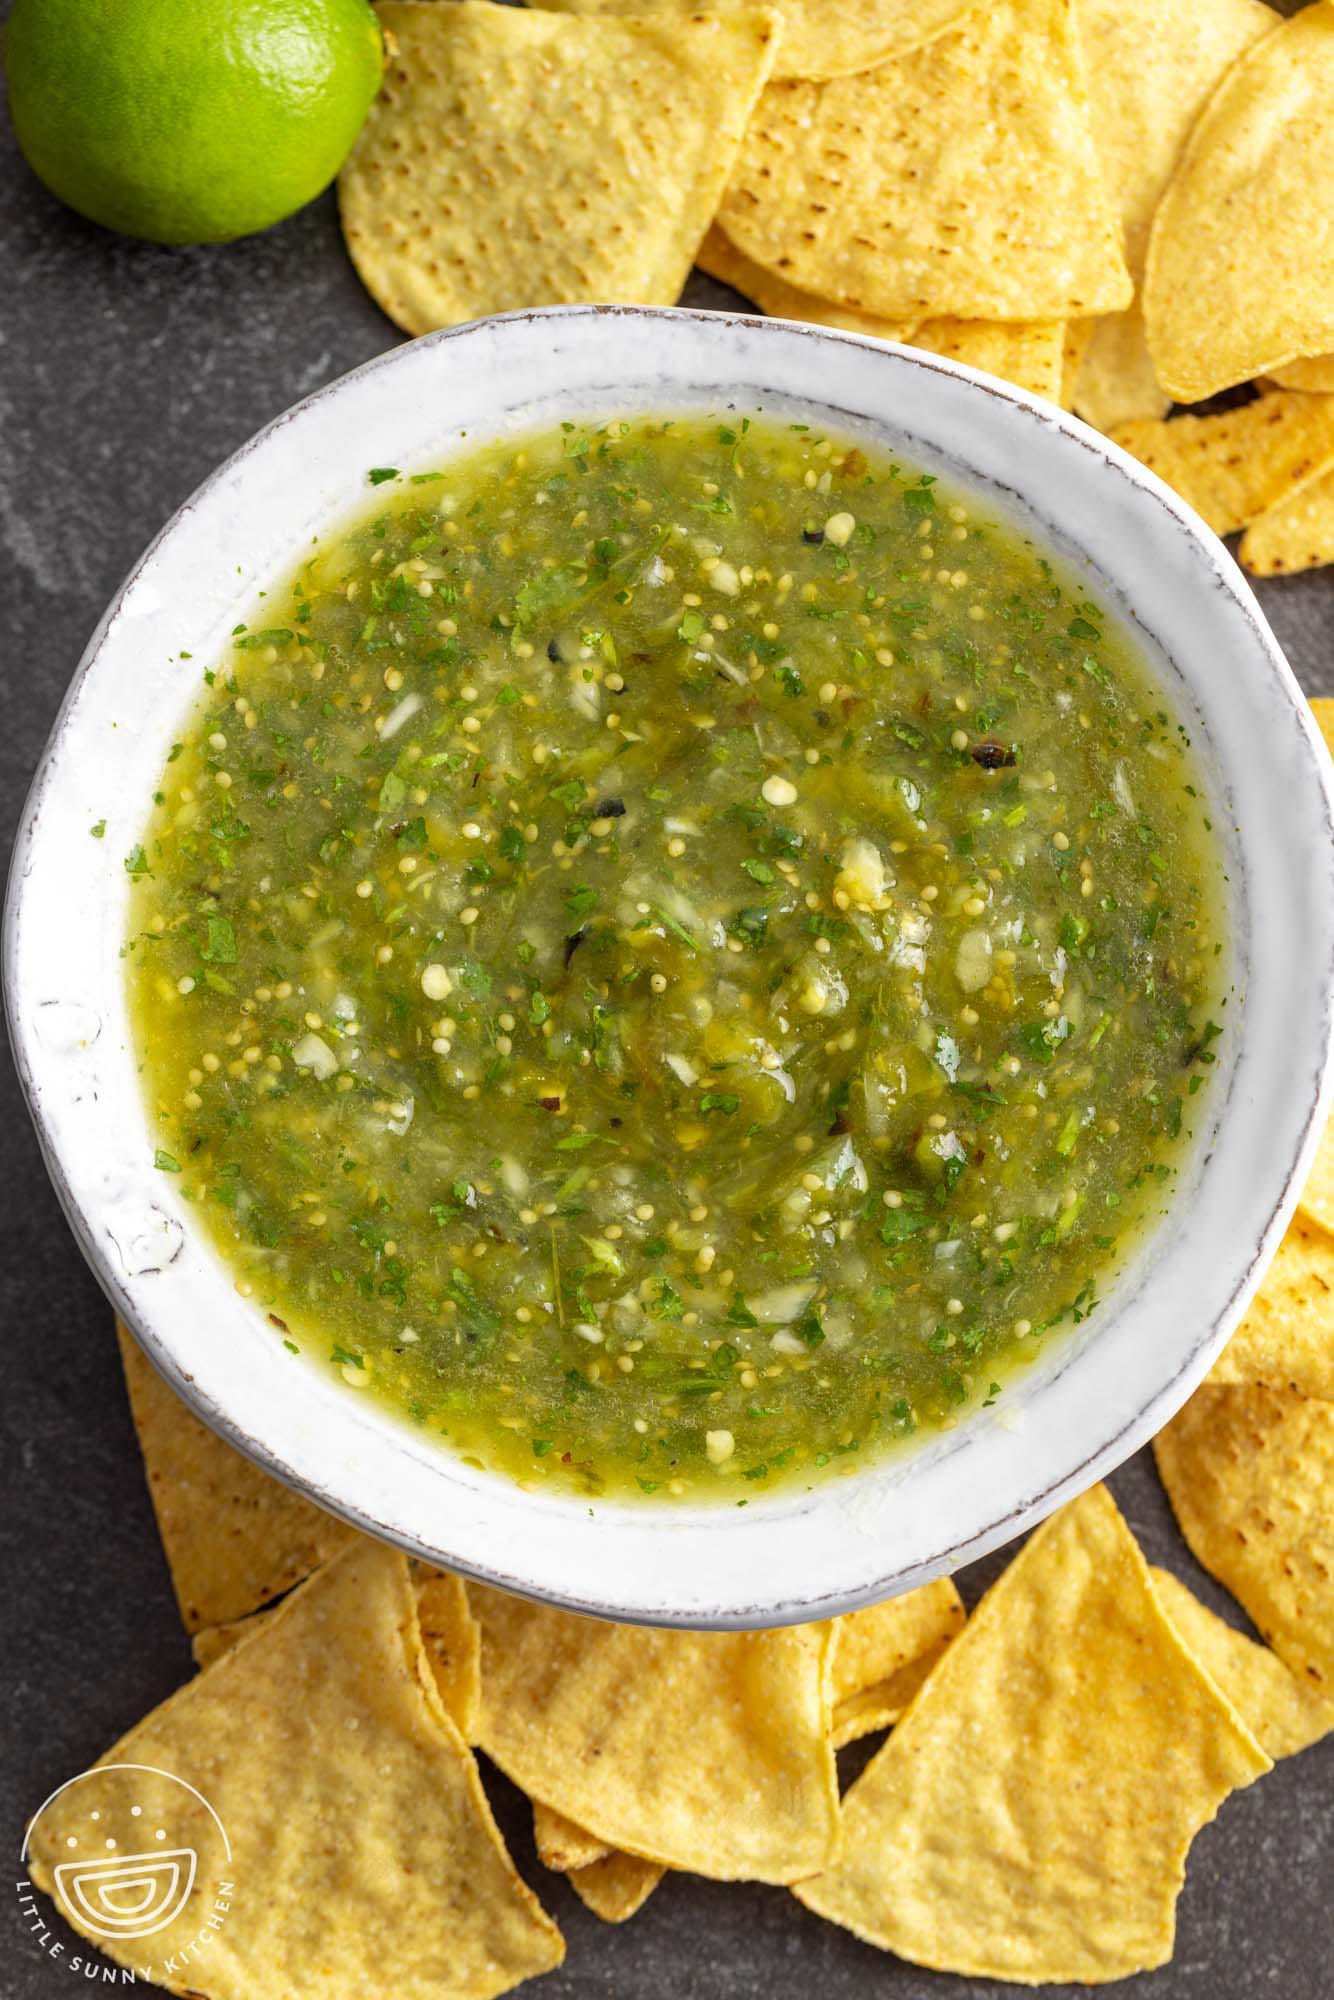 Overhead shot of a bowl filled with tomatillo salsa, and corn chips on the sides